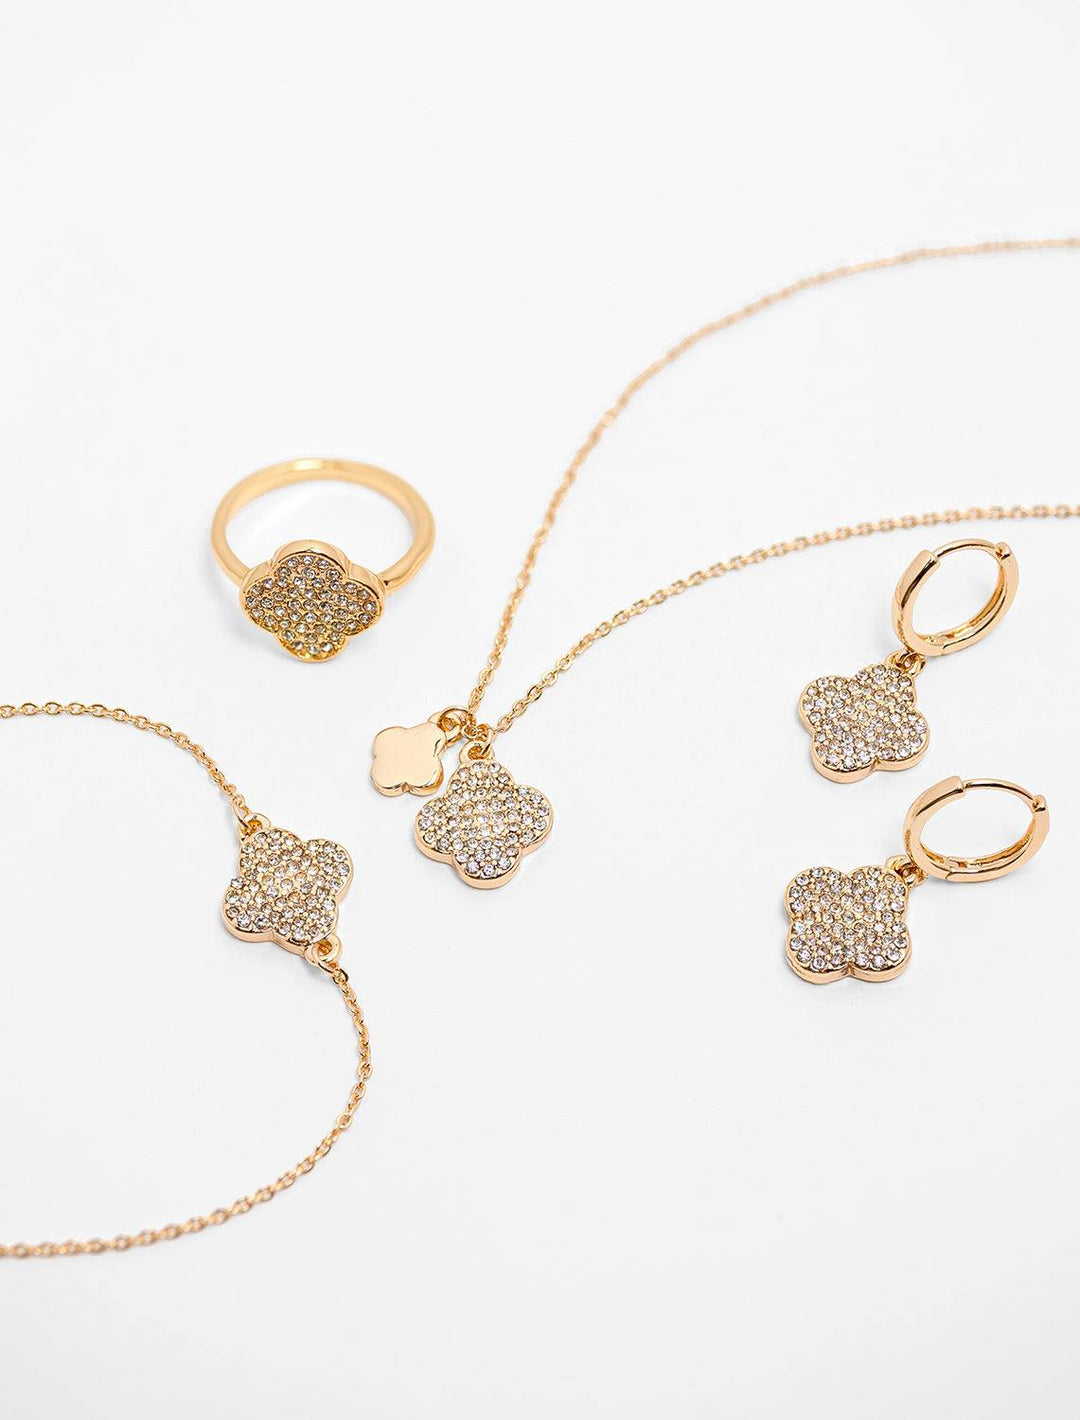 the complete four leaf charm collection from west eleventh, showing ring, bracelet, necklace and earrings